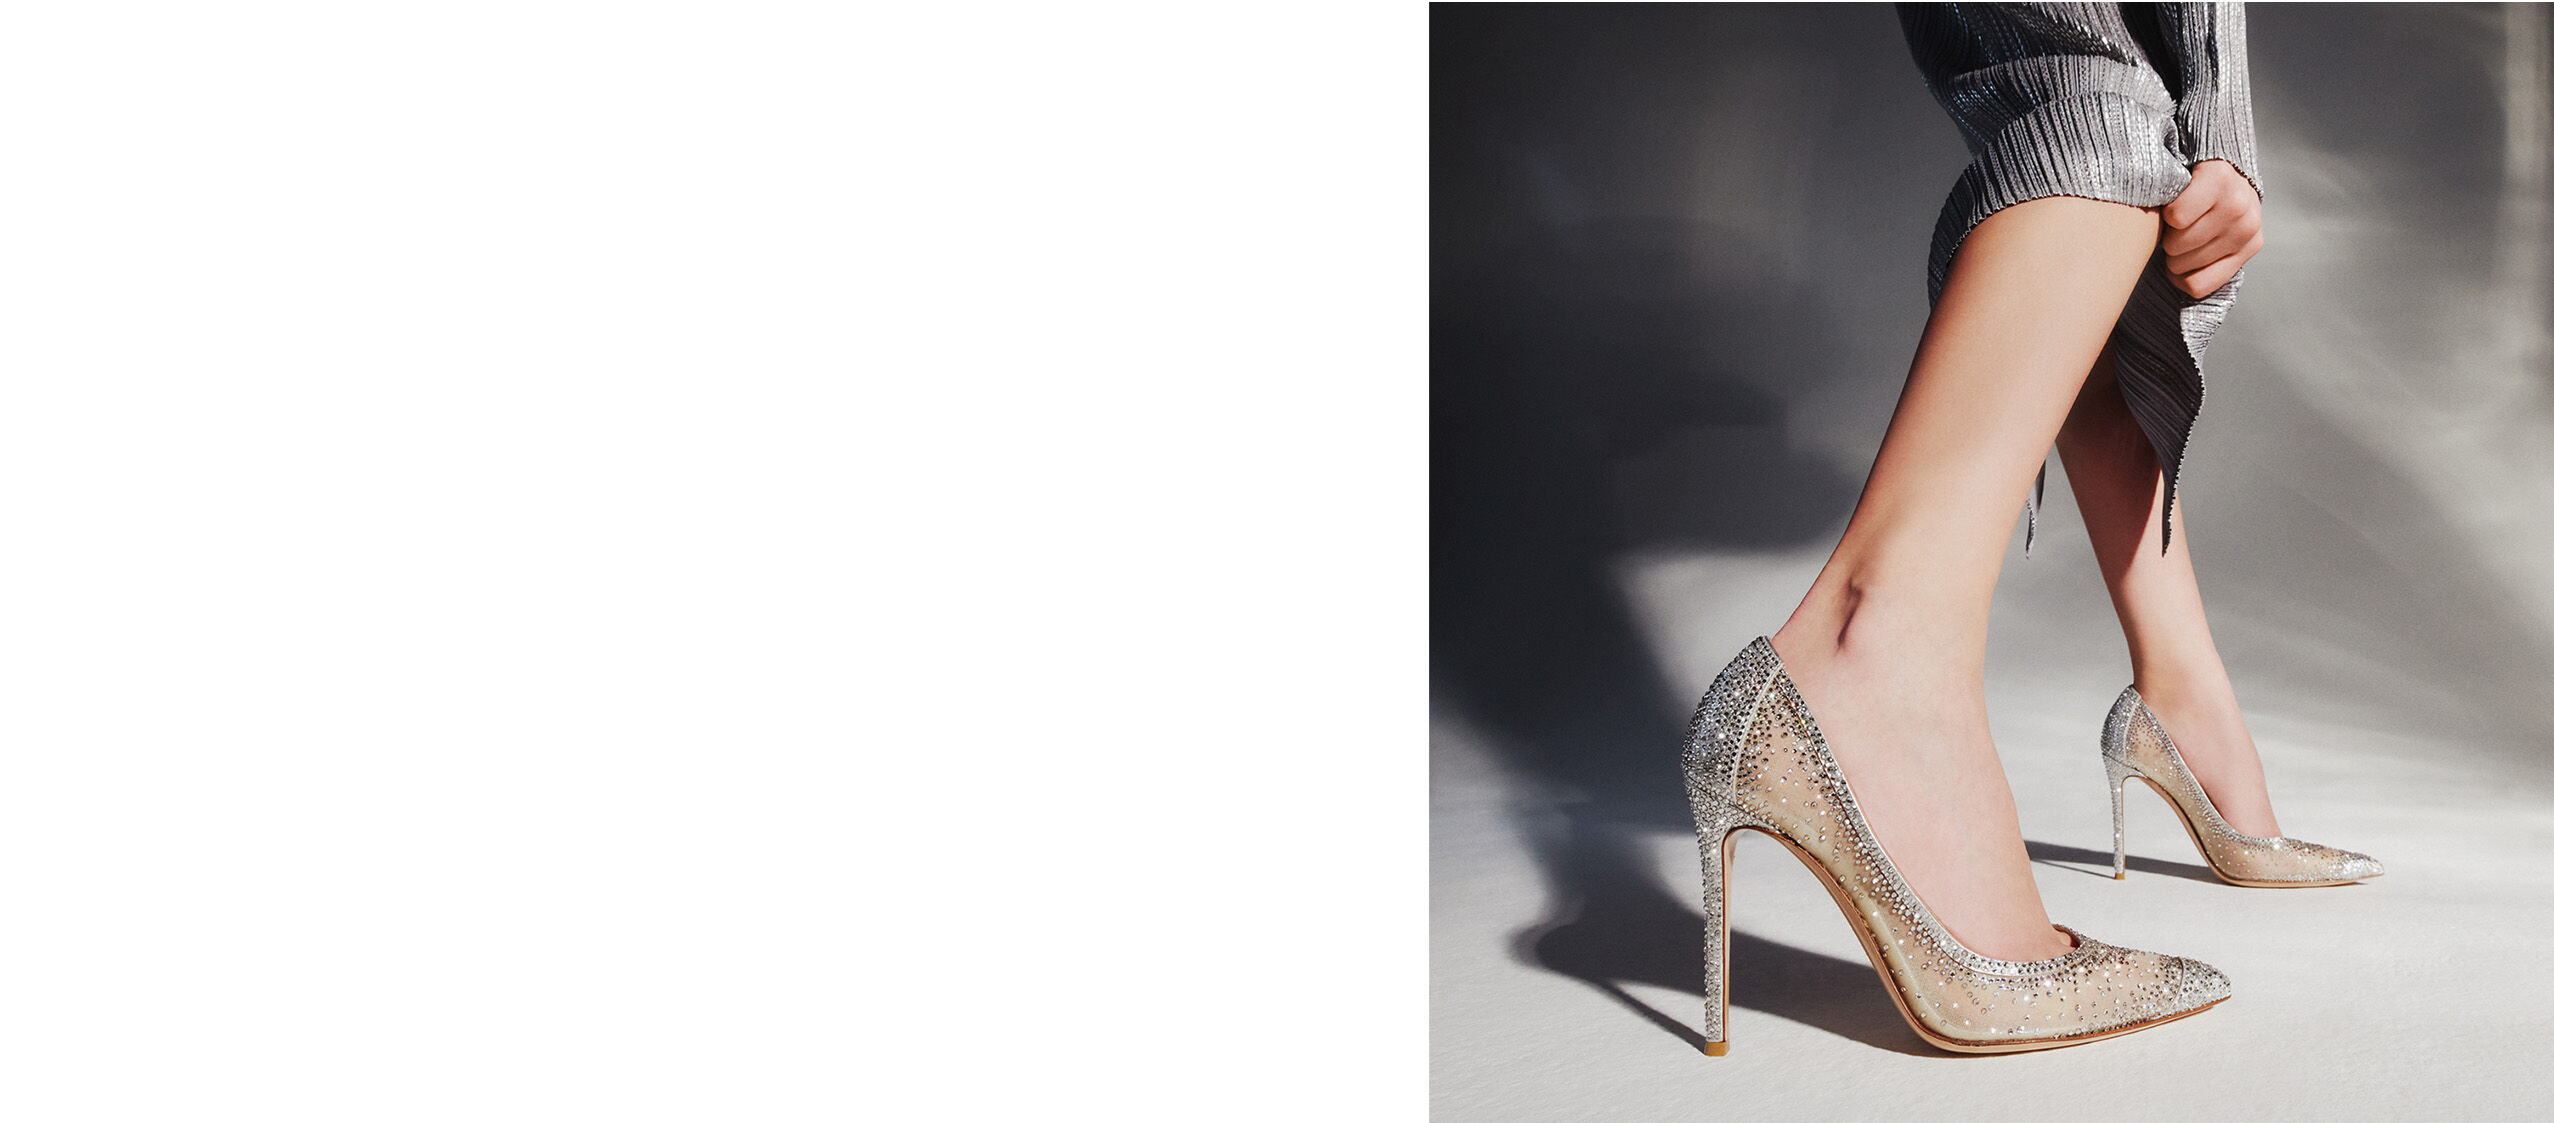 Gianvito Rossi: Italian Luxury Shoes and Accessories